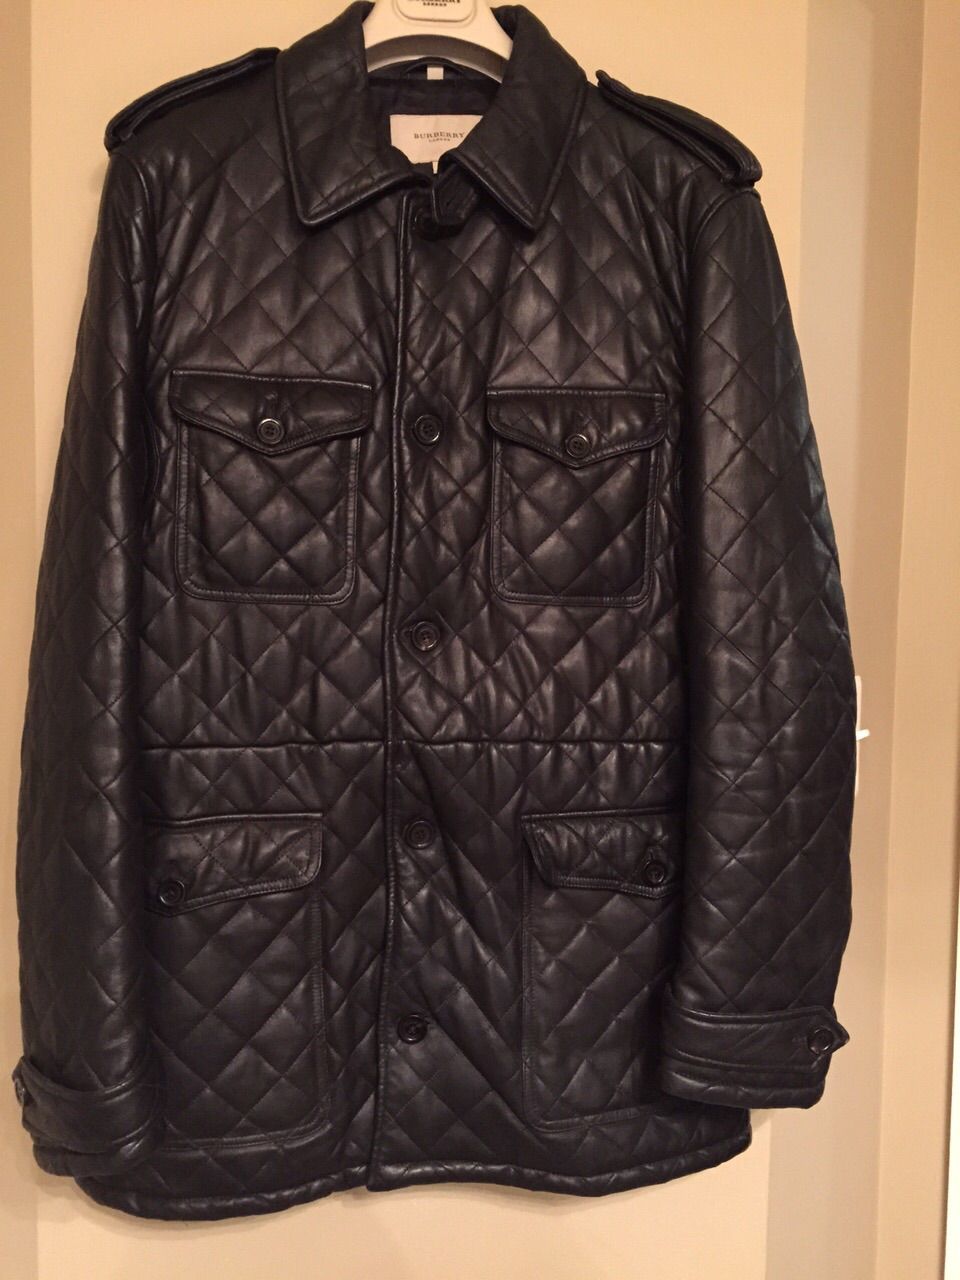 Burberry Leather jacket Lambskin Quilt | Grailed